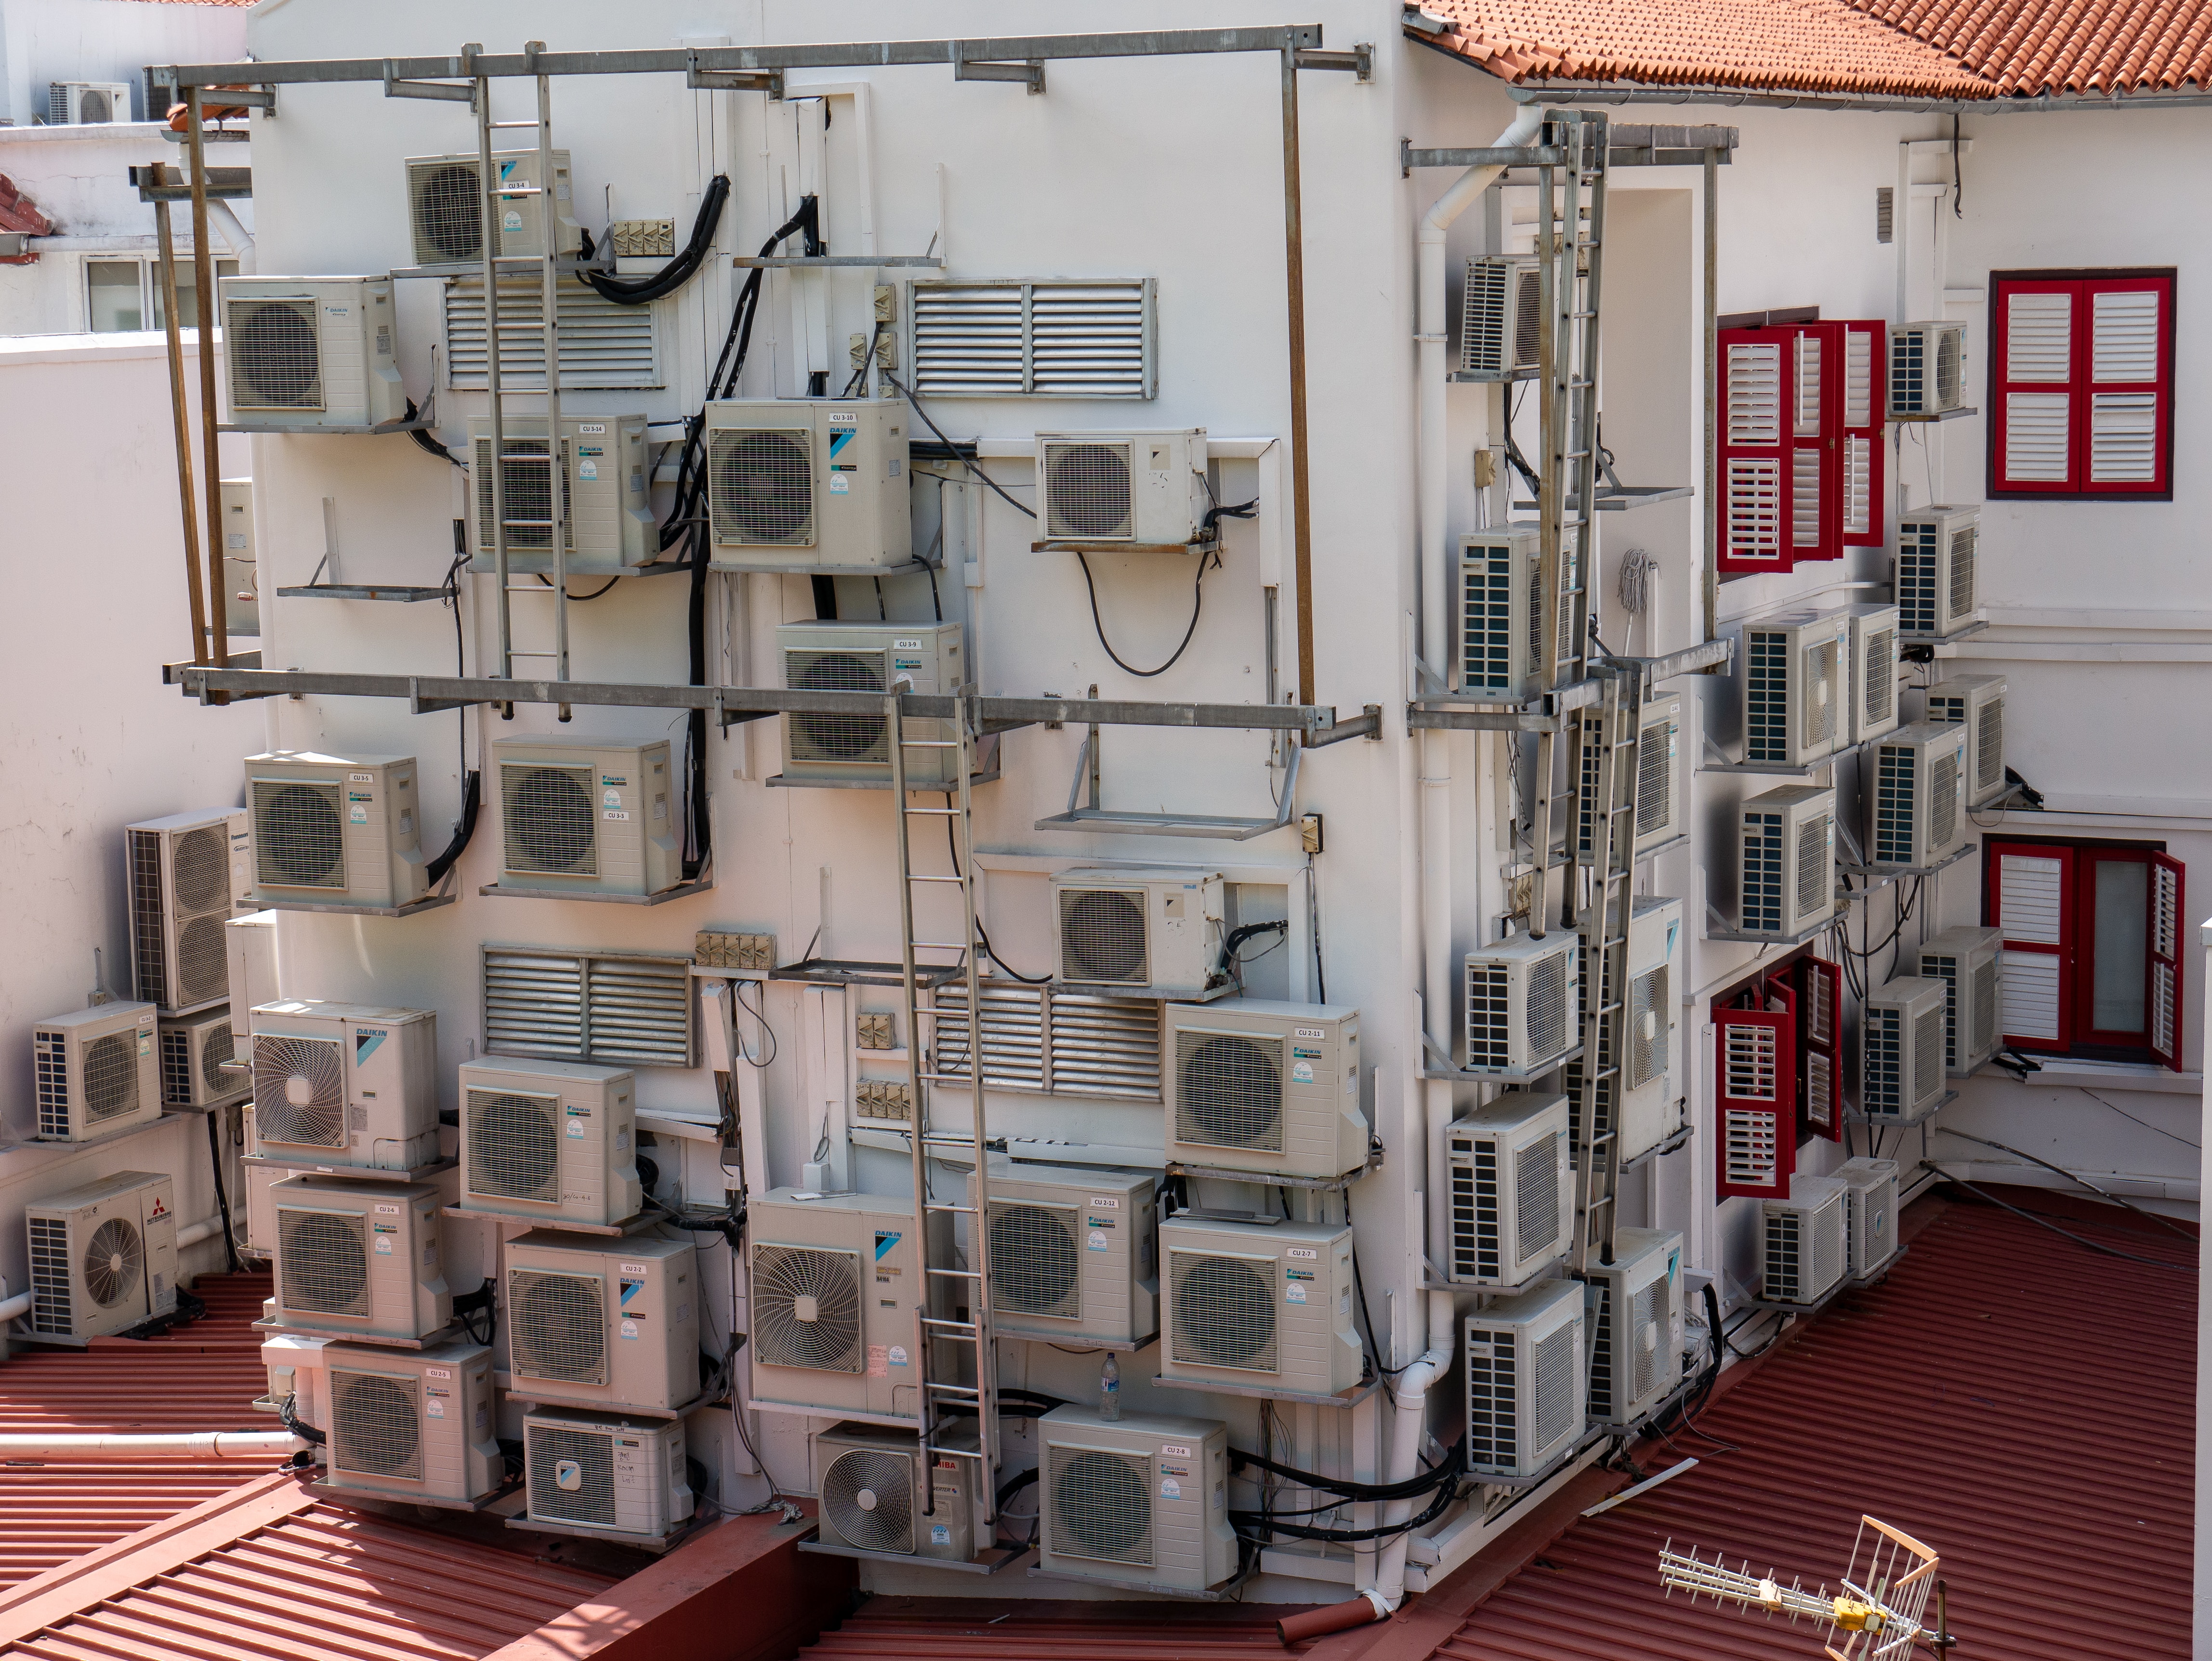 The exterior of a residential building in Singapore covered in mini split air conditioners. Photo: Alexandre Lecocq, 2019.